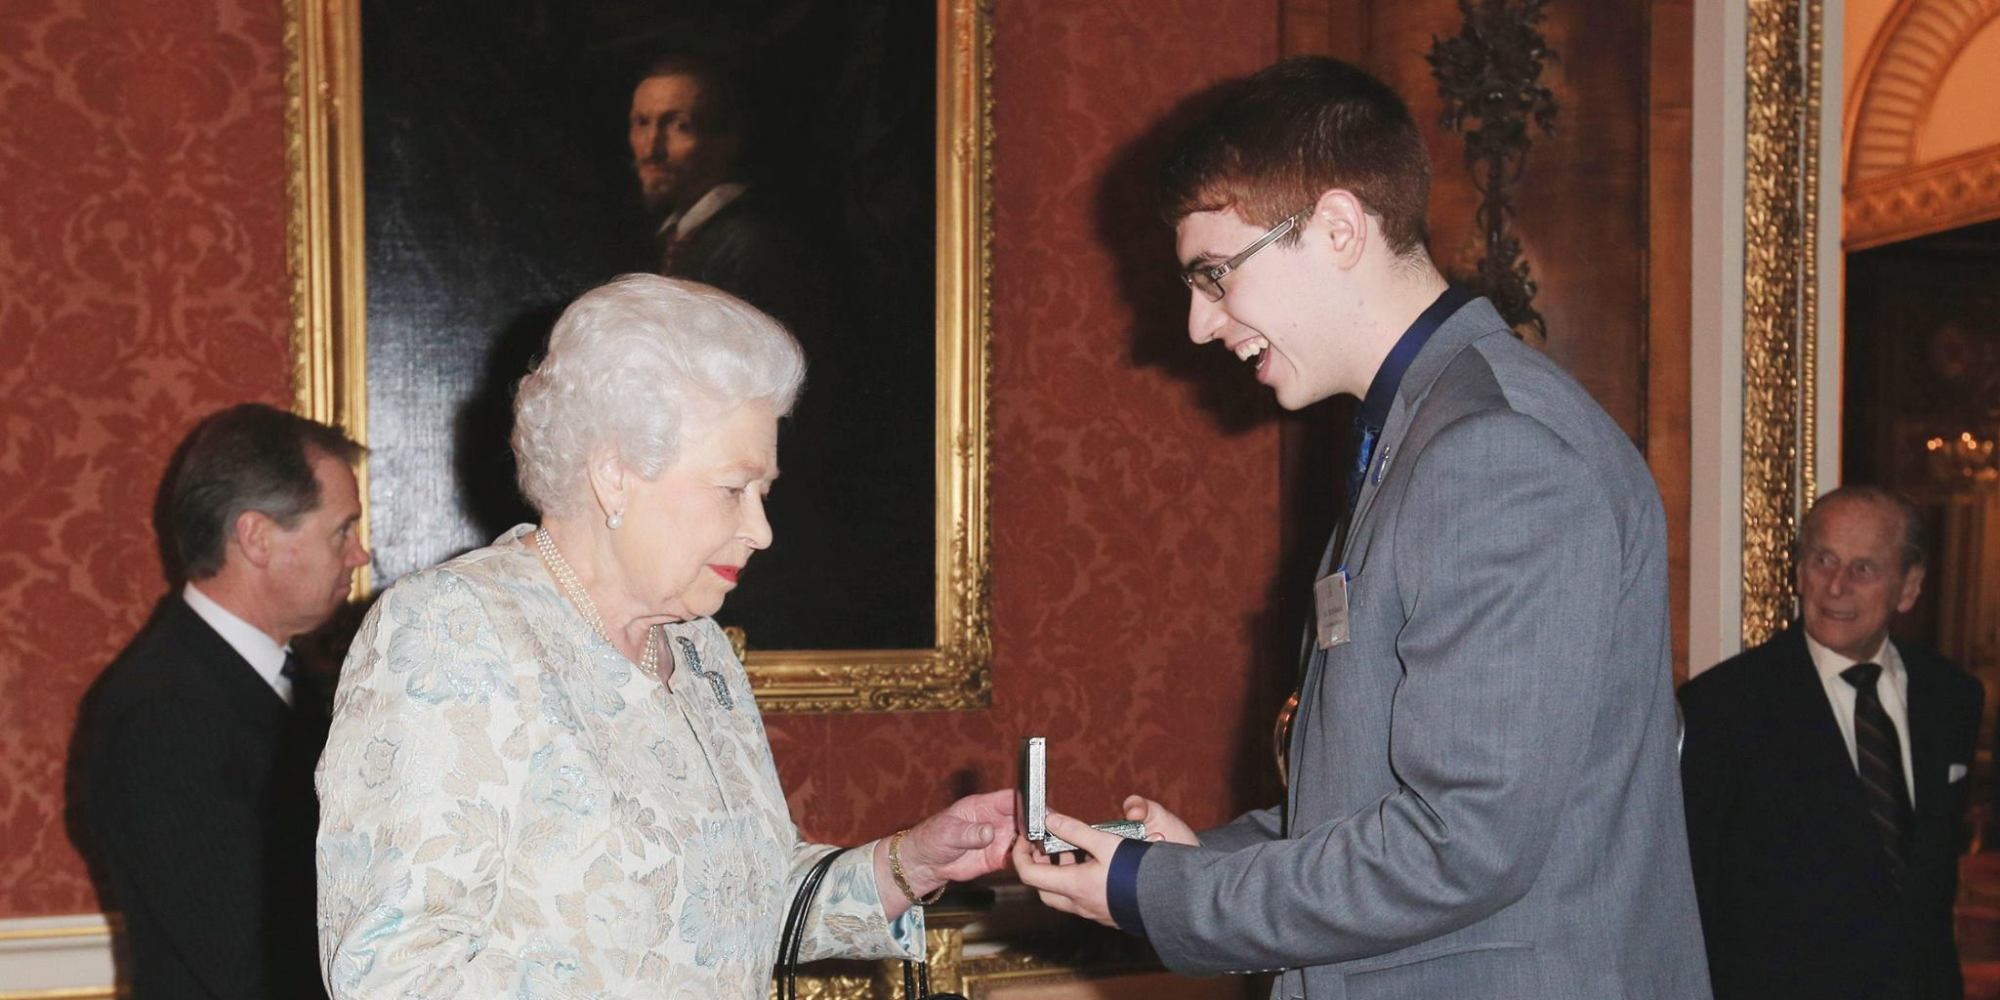 Tyler Bailer, Wetaskiwin Teen, Honoured By The Queen For Saving Stepdad's Life - Huffington Post Canada